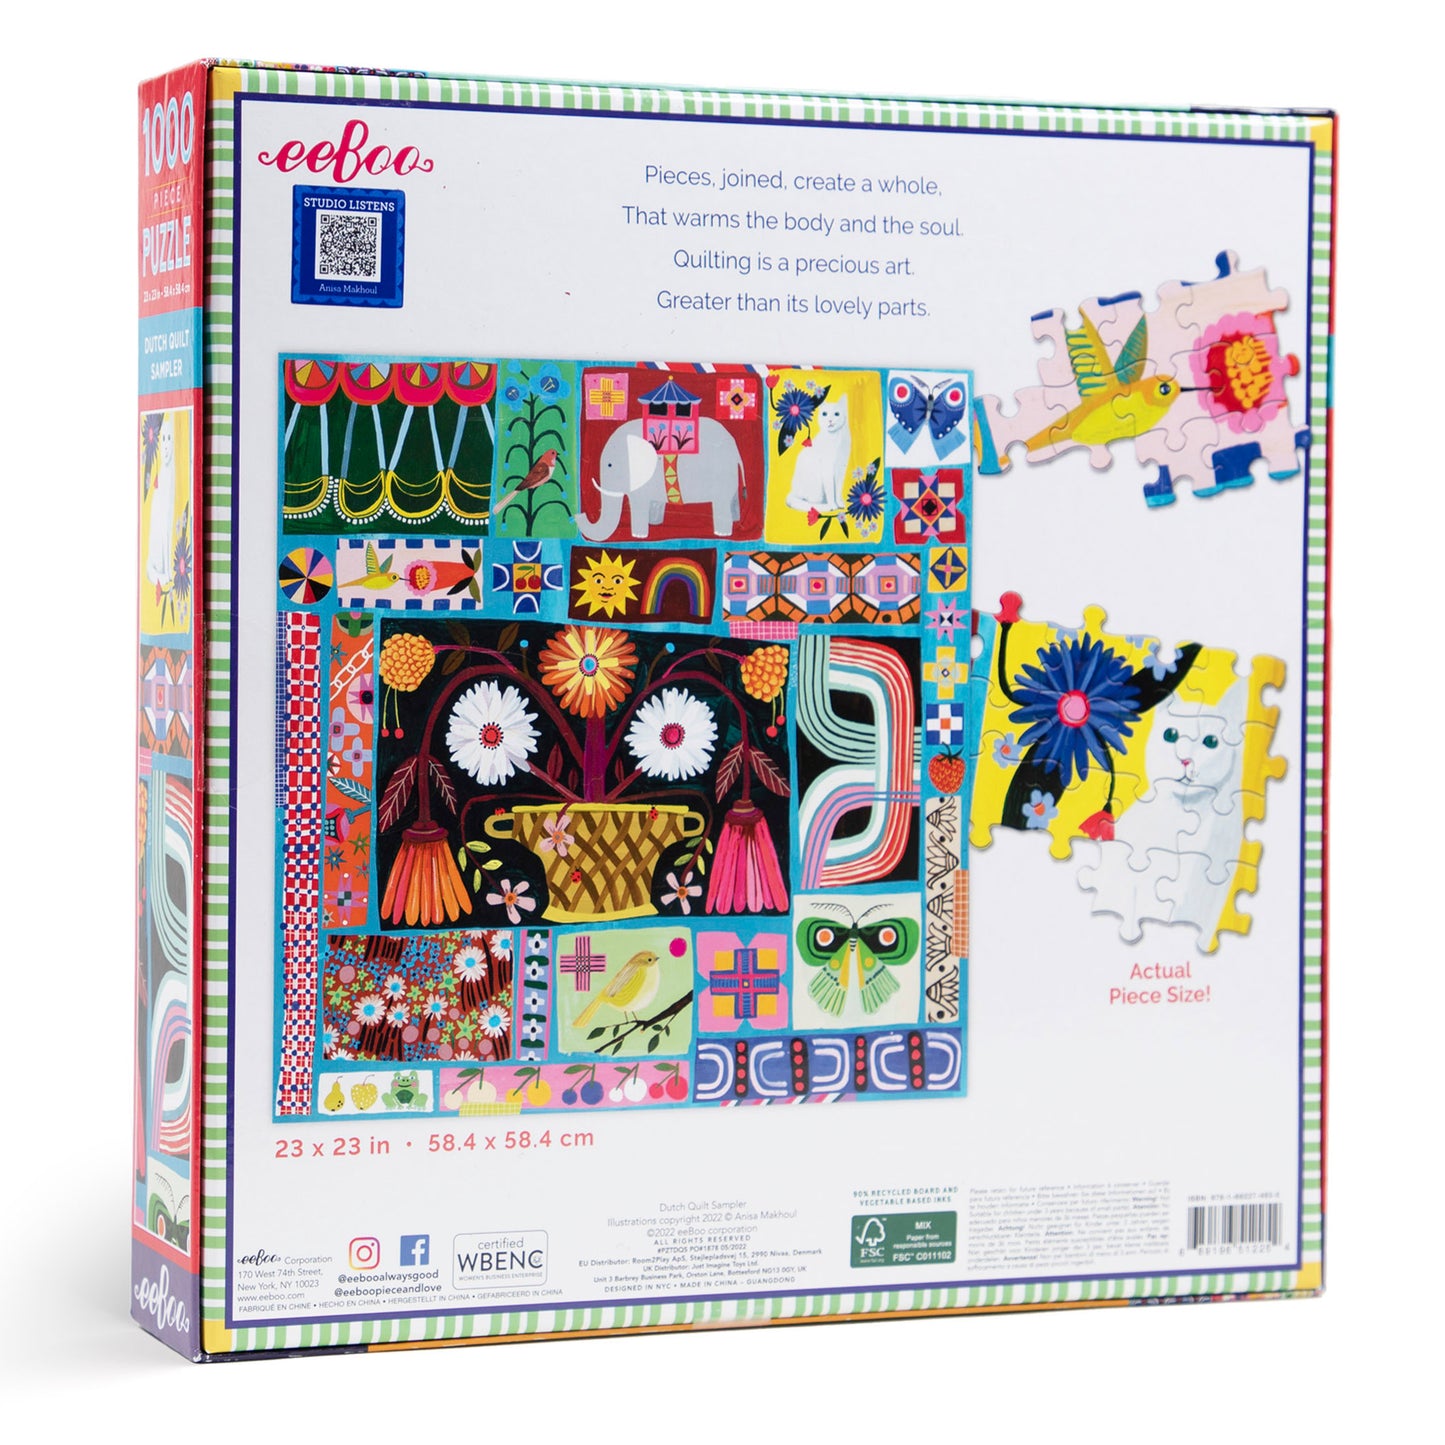 Dutch Quilt Sampler 1000 Piece Jigsaw Puzzle eeBoo Gifts for Adults